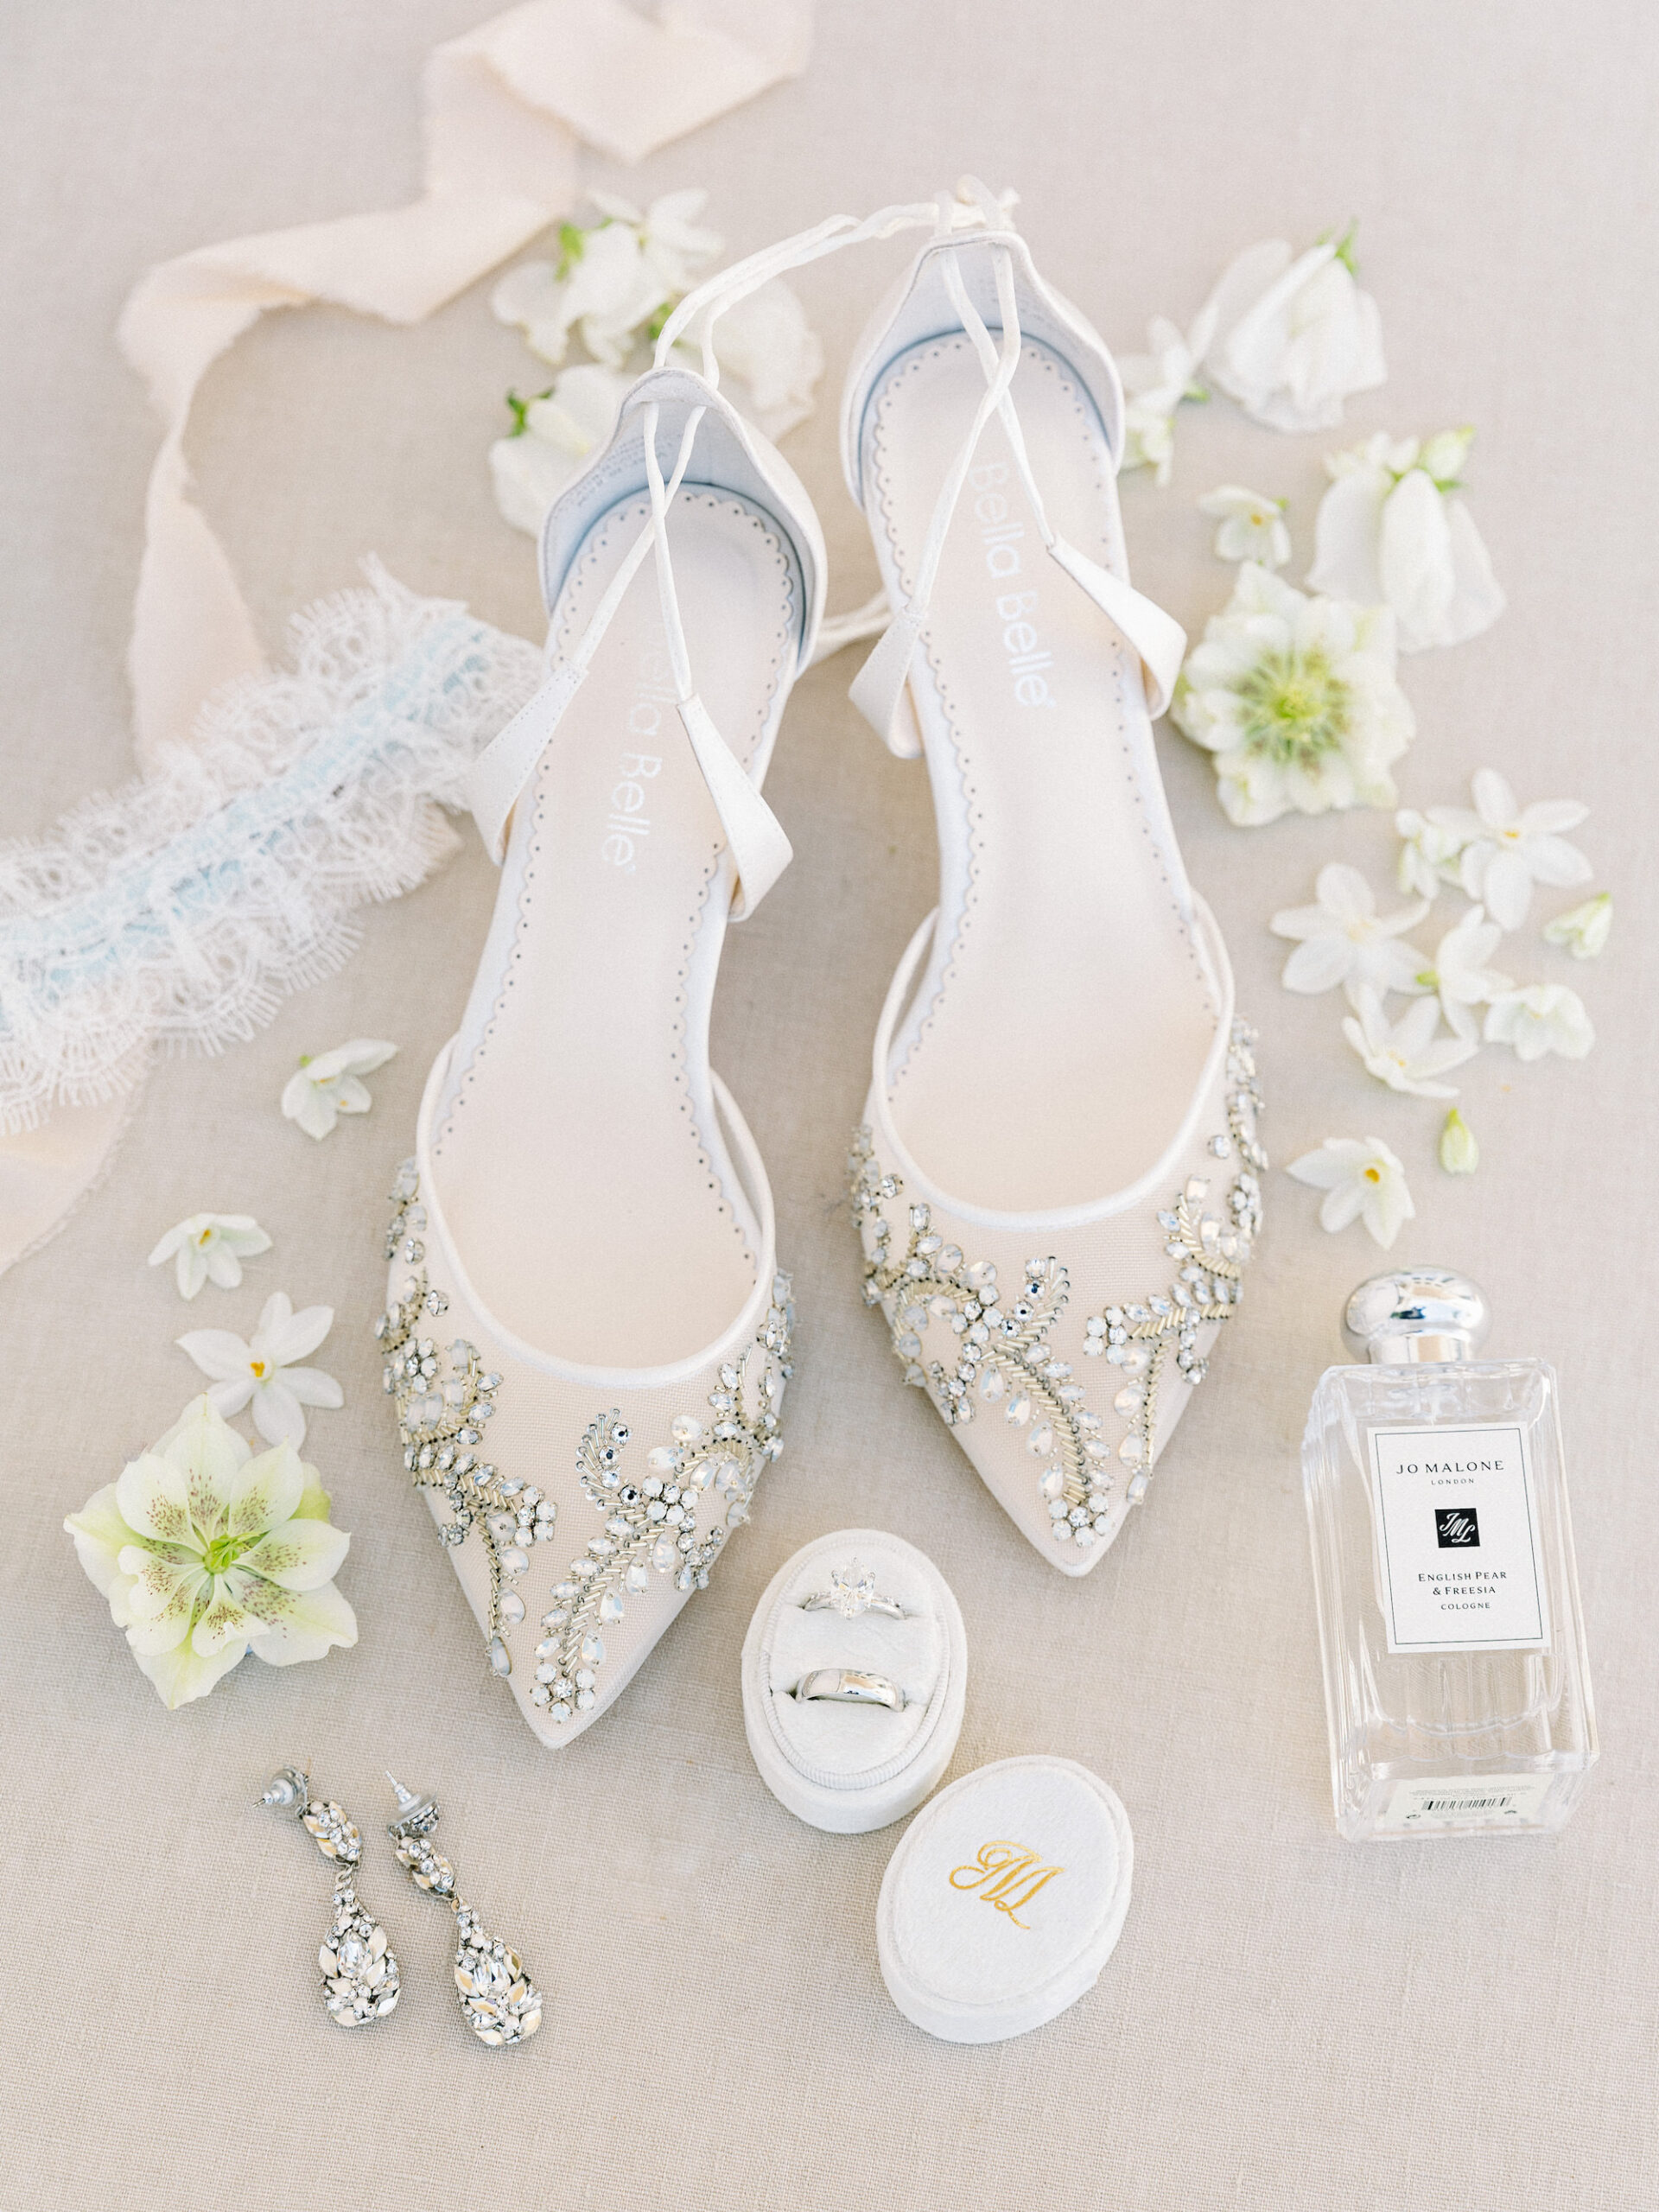 Bridal Wedding Accessories, Bella Belle Florence Wedding Shoes, Crystal Embellished Heel with Mesh, Oval Diamond Engagement Ring, Groom White Gold Wedding Ring in Oval Ring Box, Diamond Teardrop Earrings, Jo Malone Perfume Bottle